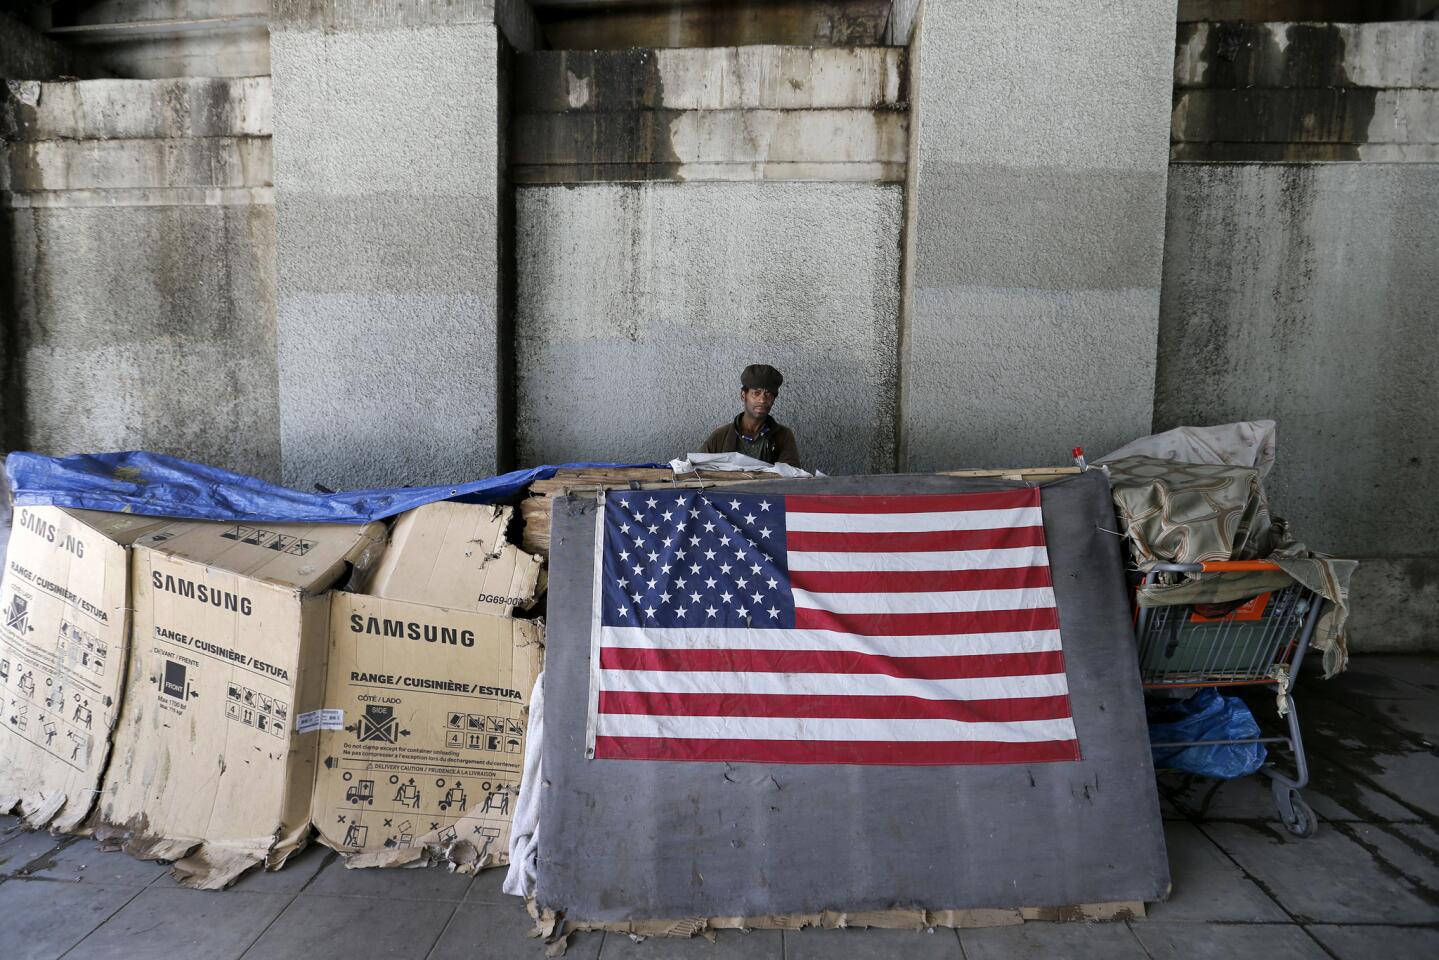 Anthony Tolliver, who has been homeless for 30 years, moved to another bridge after Caltrans workers started cleaning up and removing debris from a tented homeless community under the 101 Freeway bridge on Hoover Street in Historic Filipinotown